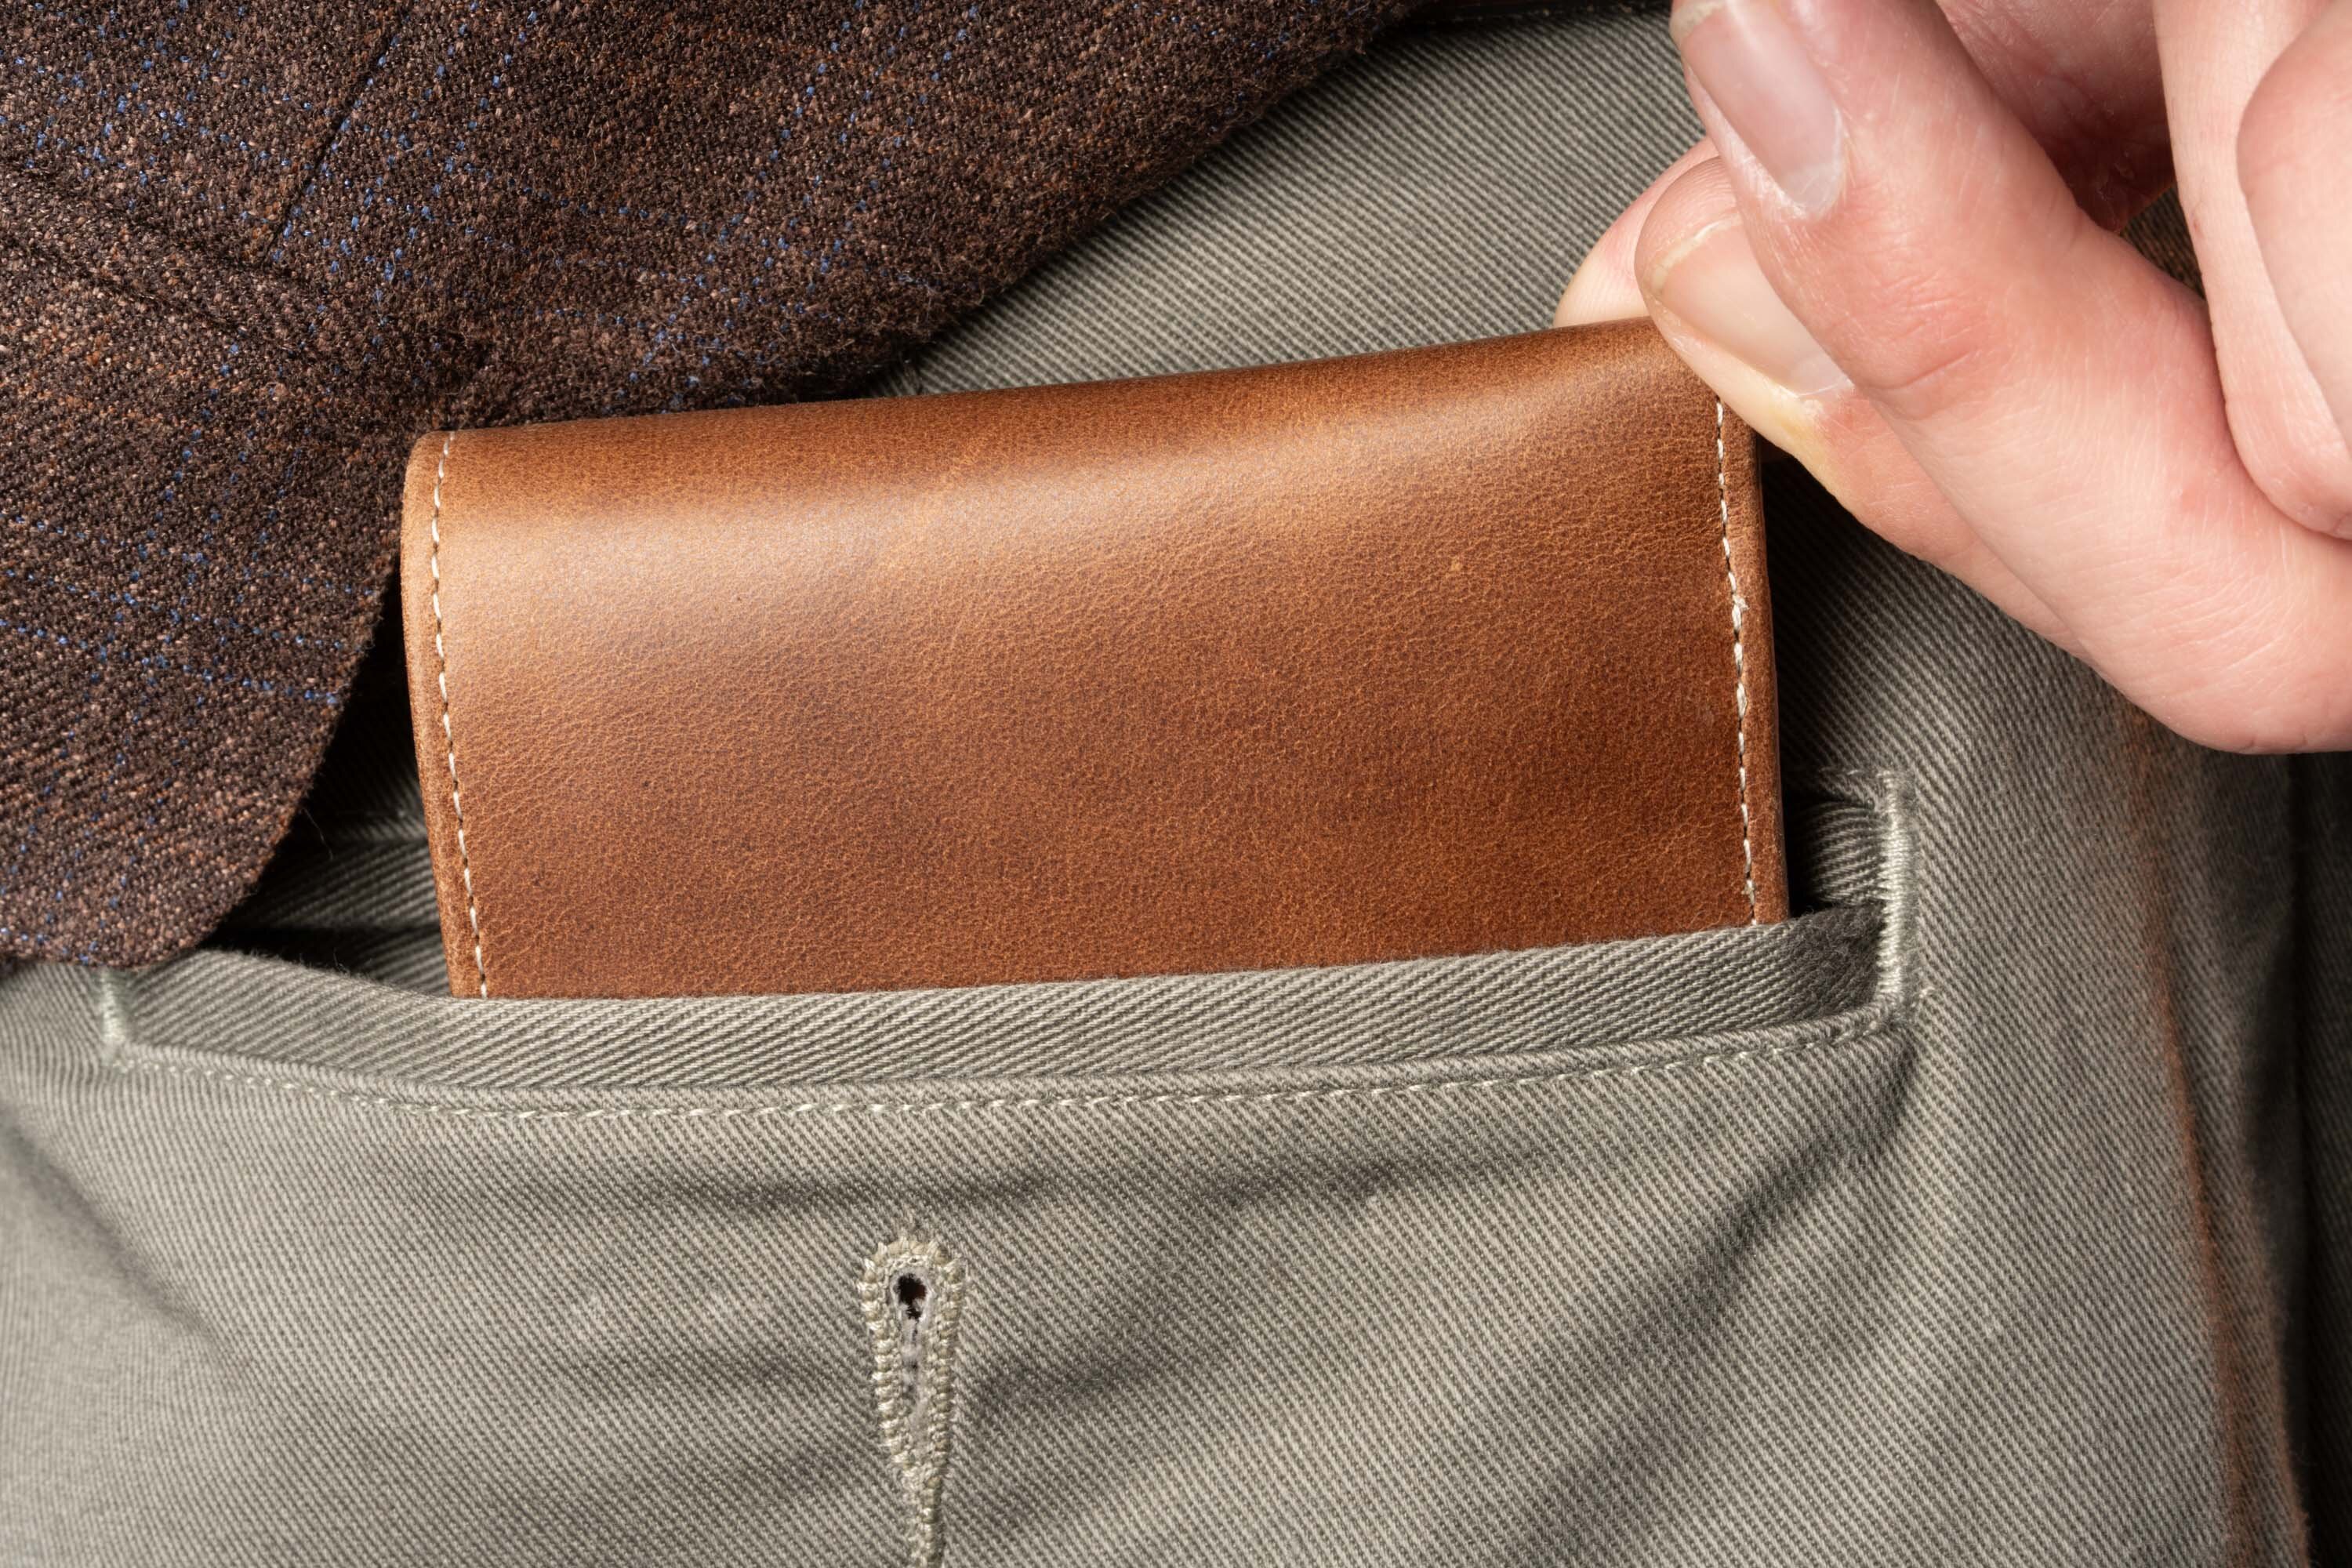 Saddle Brown Bifold Wallet in Full-Grain Montecristo Leather Inserted to the back pocket